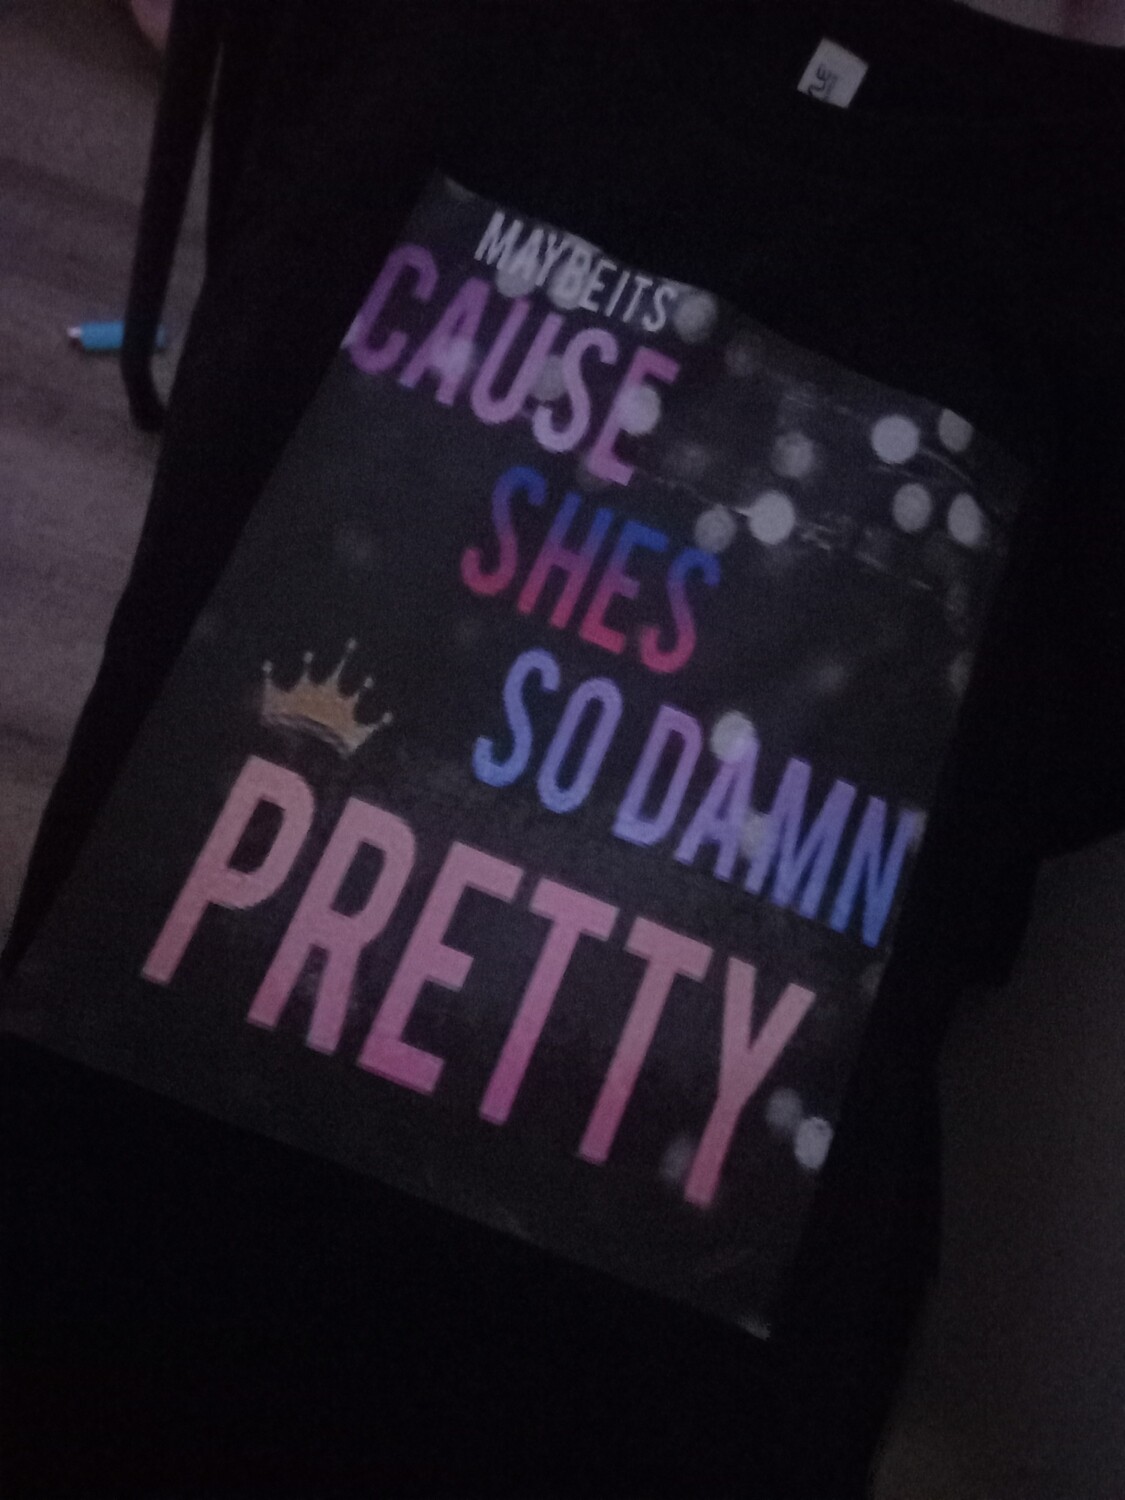 Black shirt " MAYBE ITS CAUSE SHES SO DAMN PRETTY"